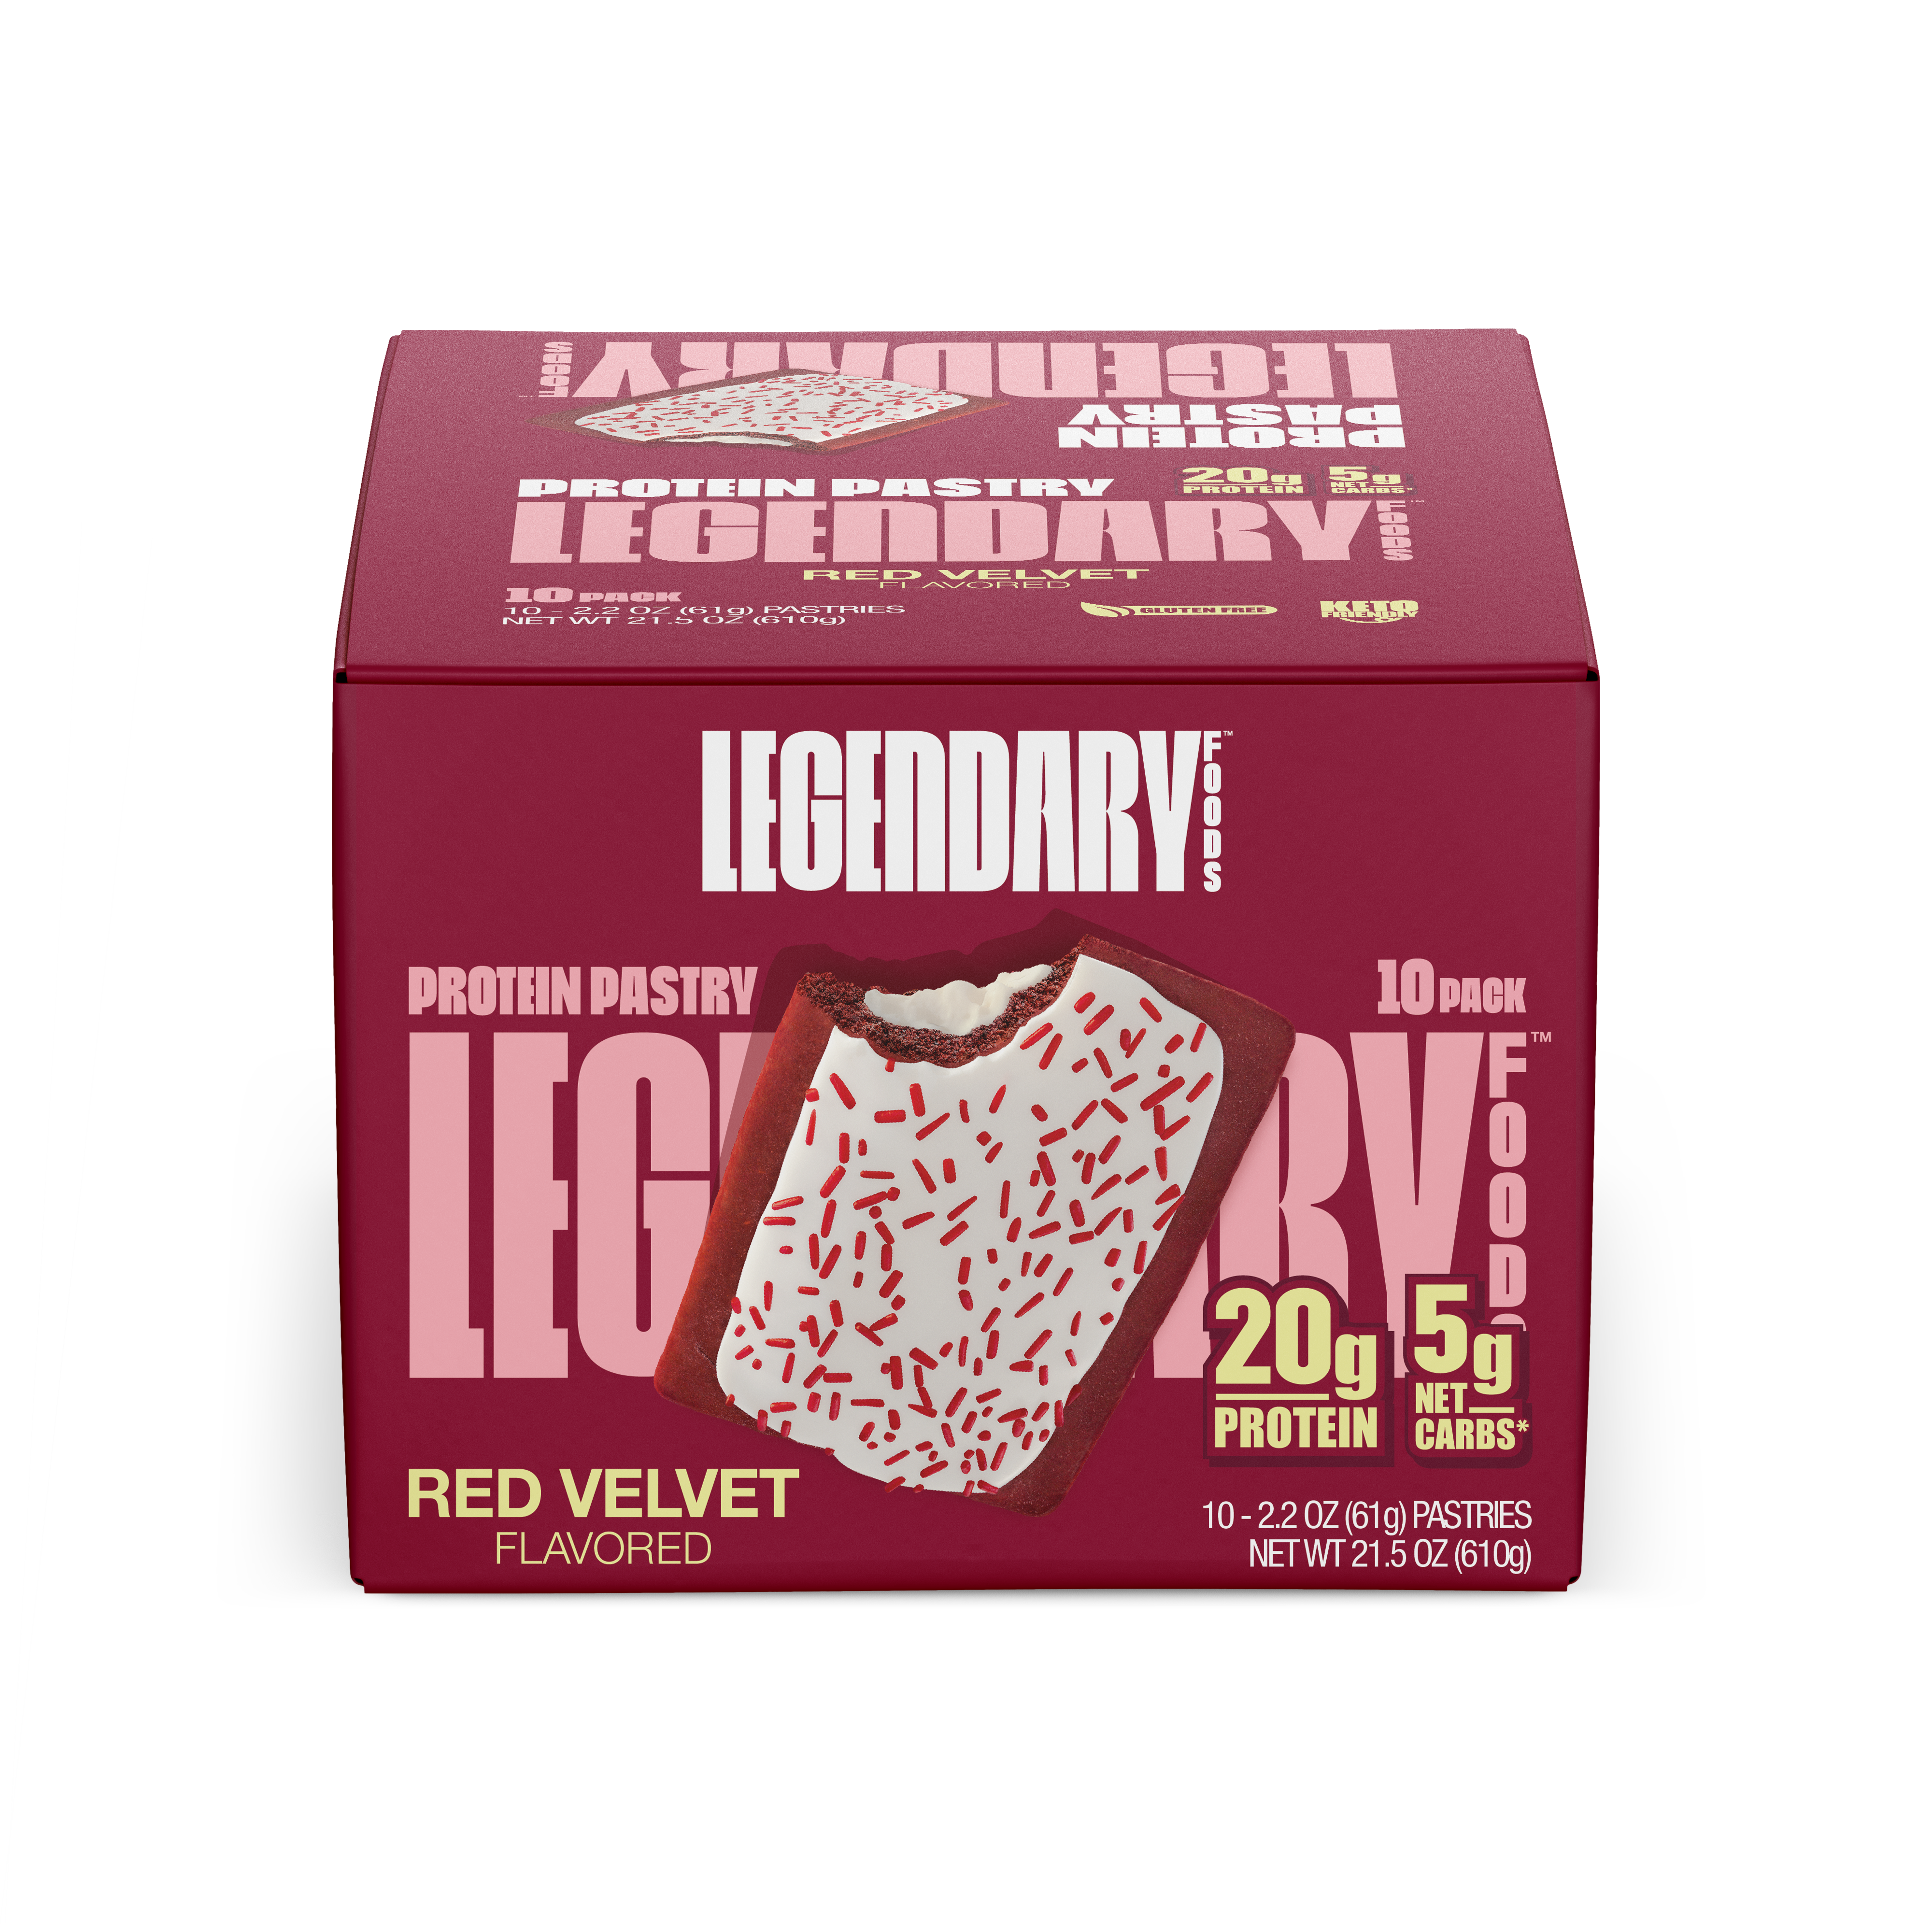 "Cake Style" Low-Carb Protein Pastry by Legendary Foods - Red Velvet